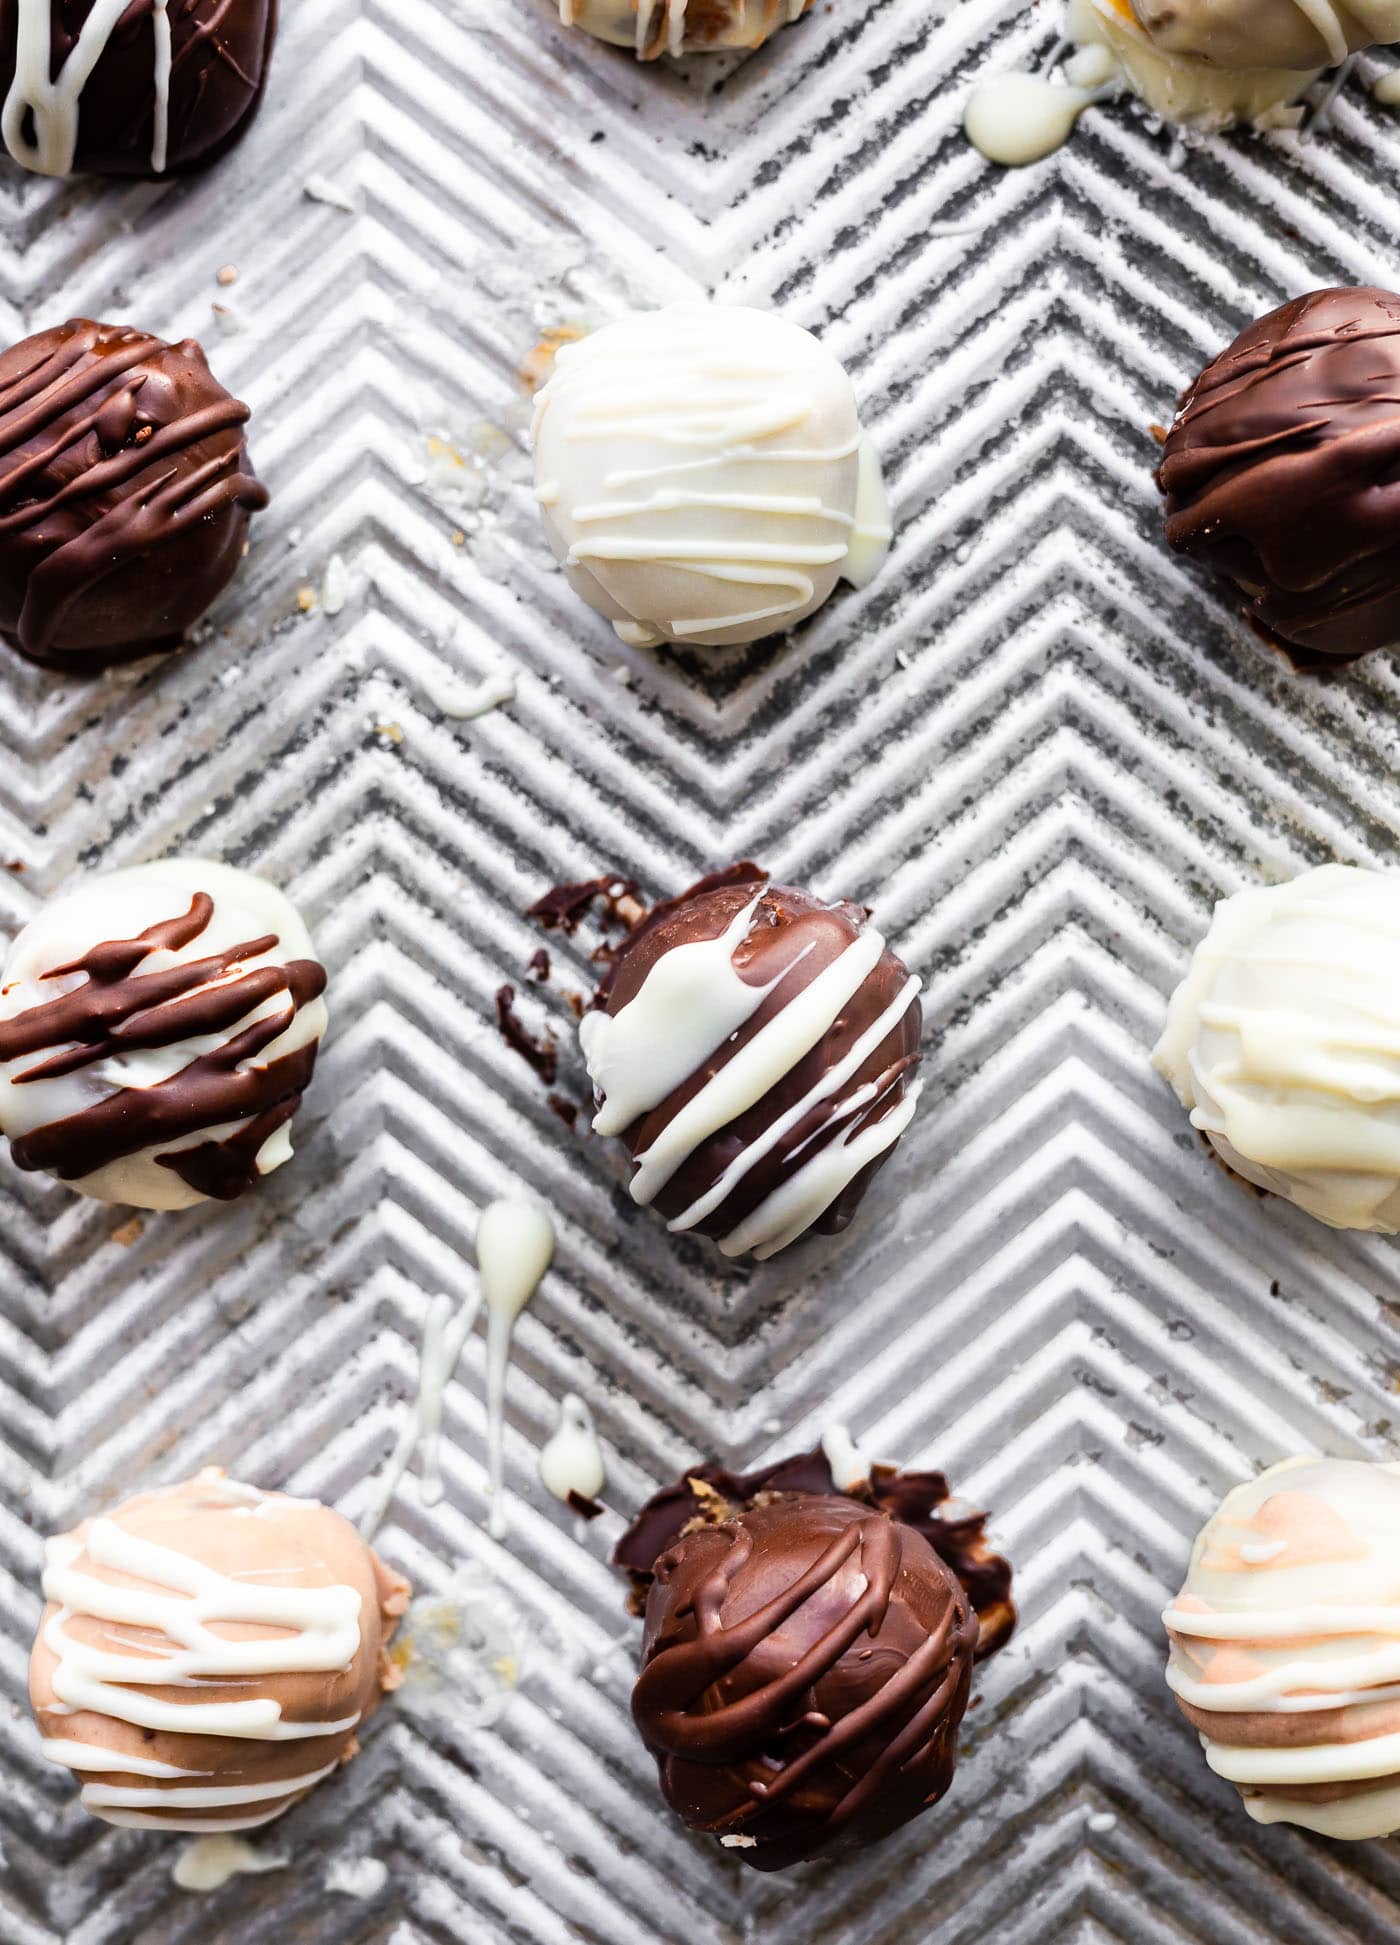 3 cake ball flavors coated in white and dark chocolate sitting on a caking sheet to set